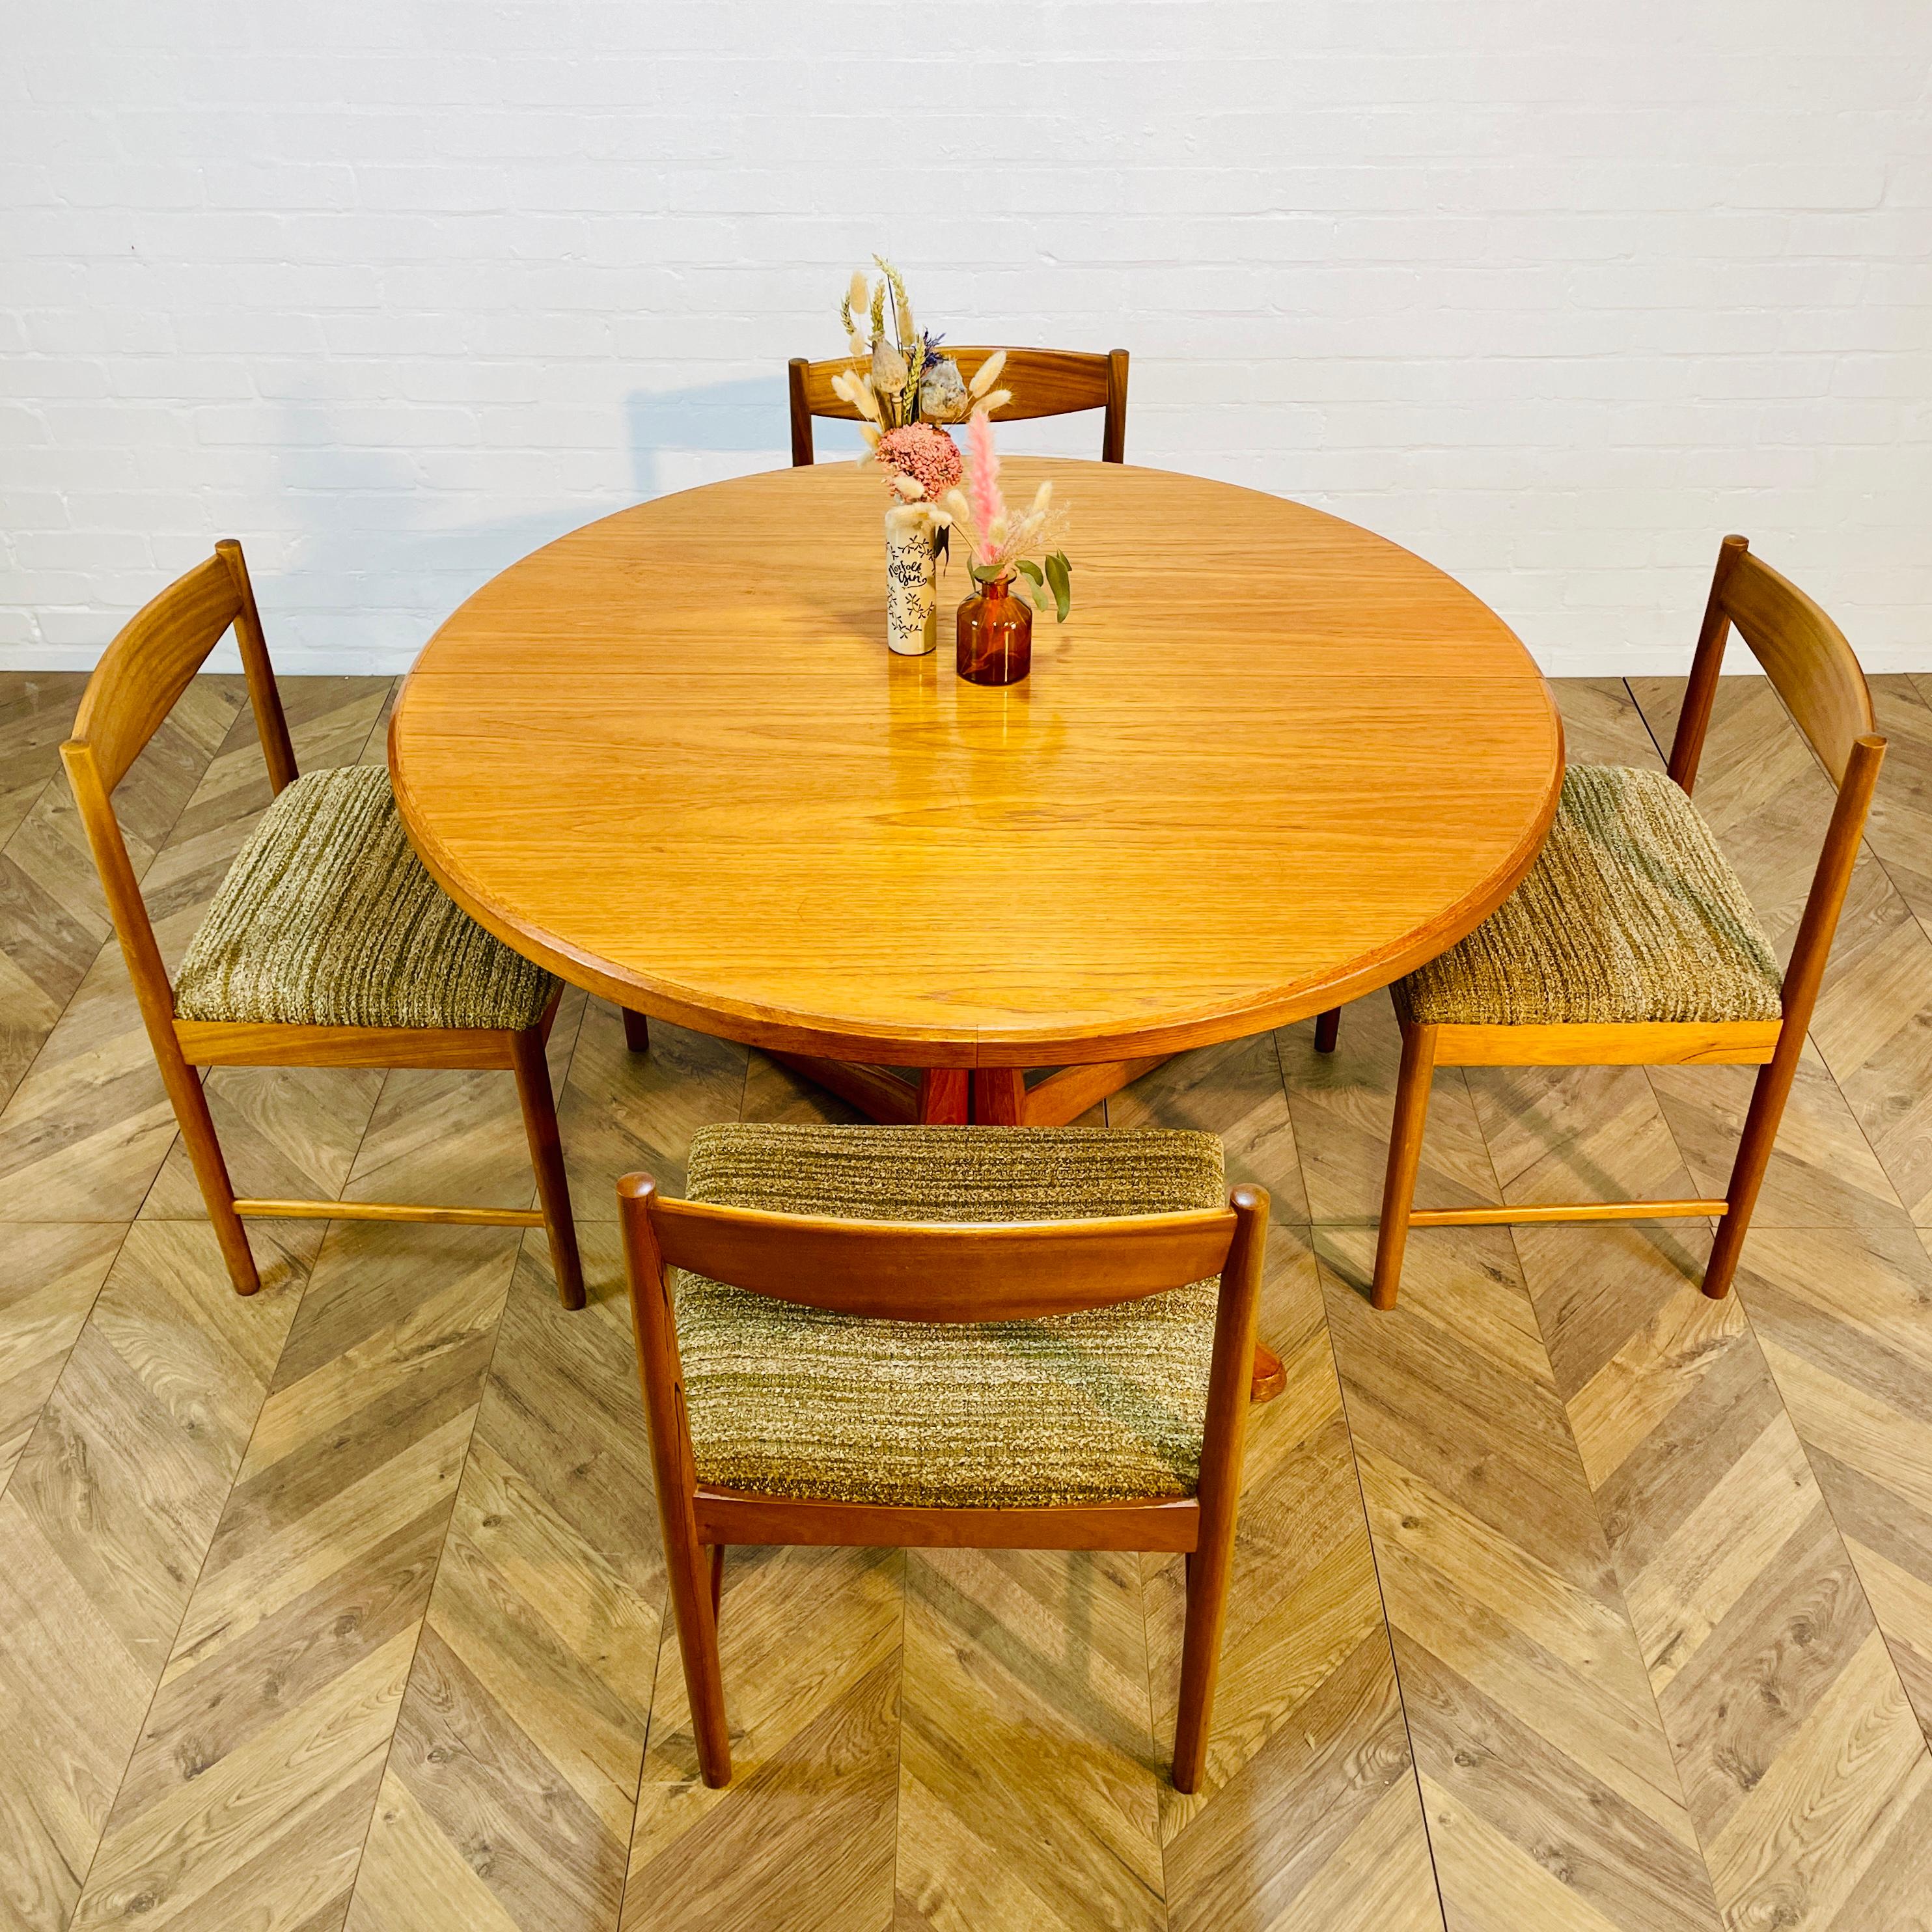 A Lovely Vintage Mid-Century Double Extending Teak Dining Table Plus 8 Dining Chairs (Incl. 2 Carvers) by McIntosh Of Kirkcaldy, dated, April 1976.

A beautifully designed circular table, with 2 extending leafs, which extends to an impressive 220 cm